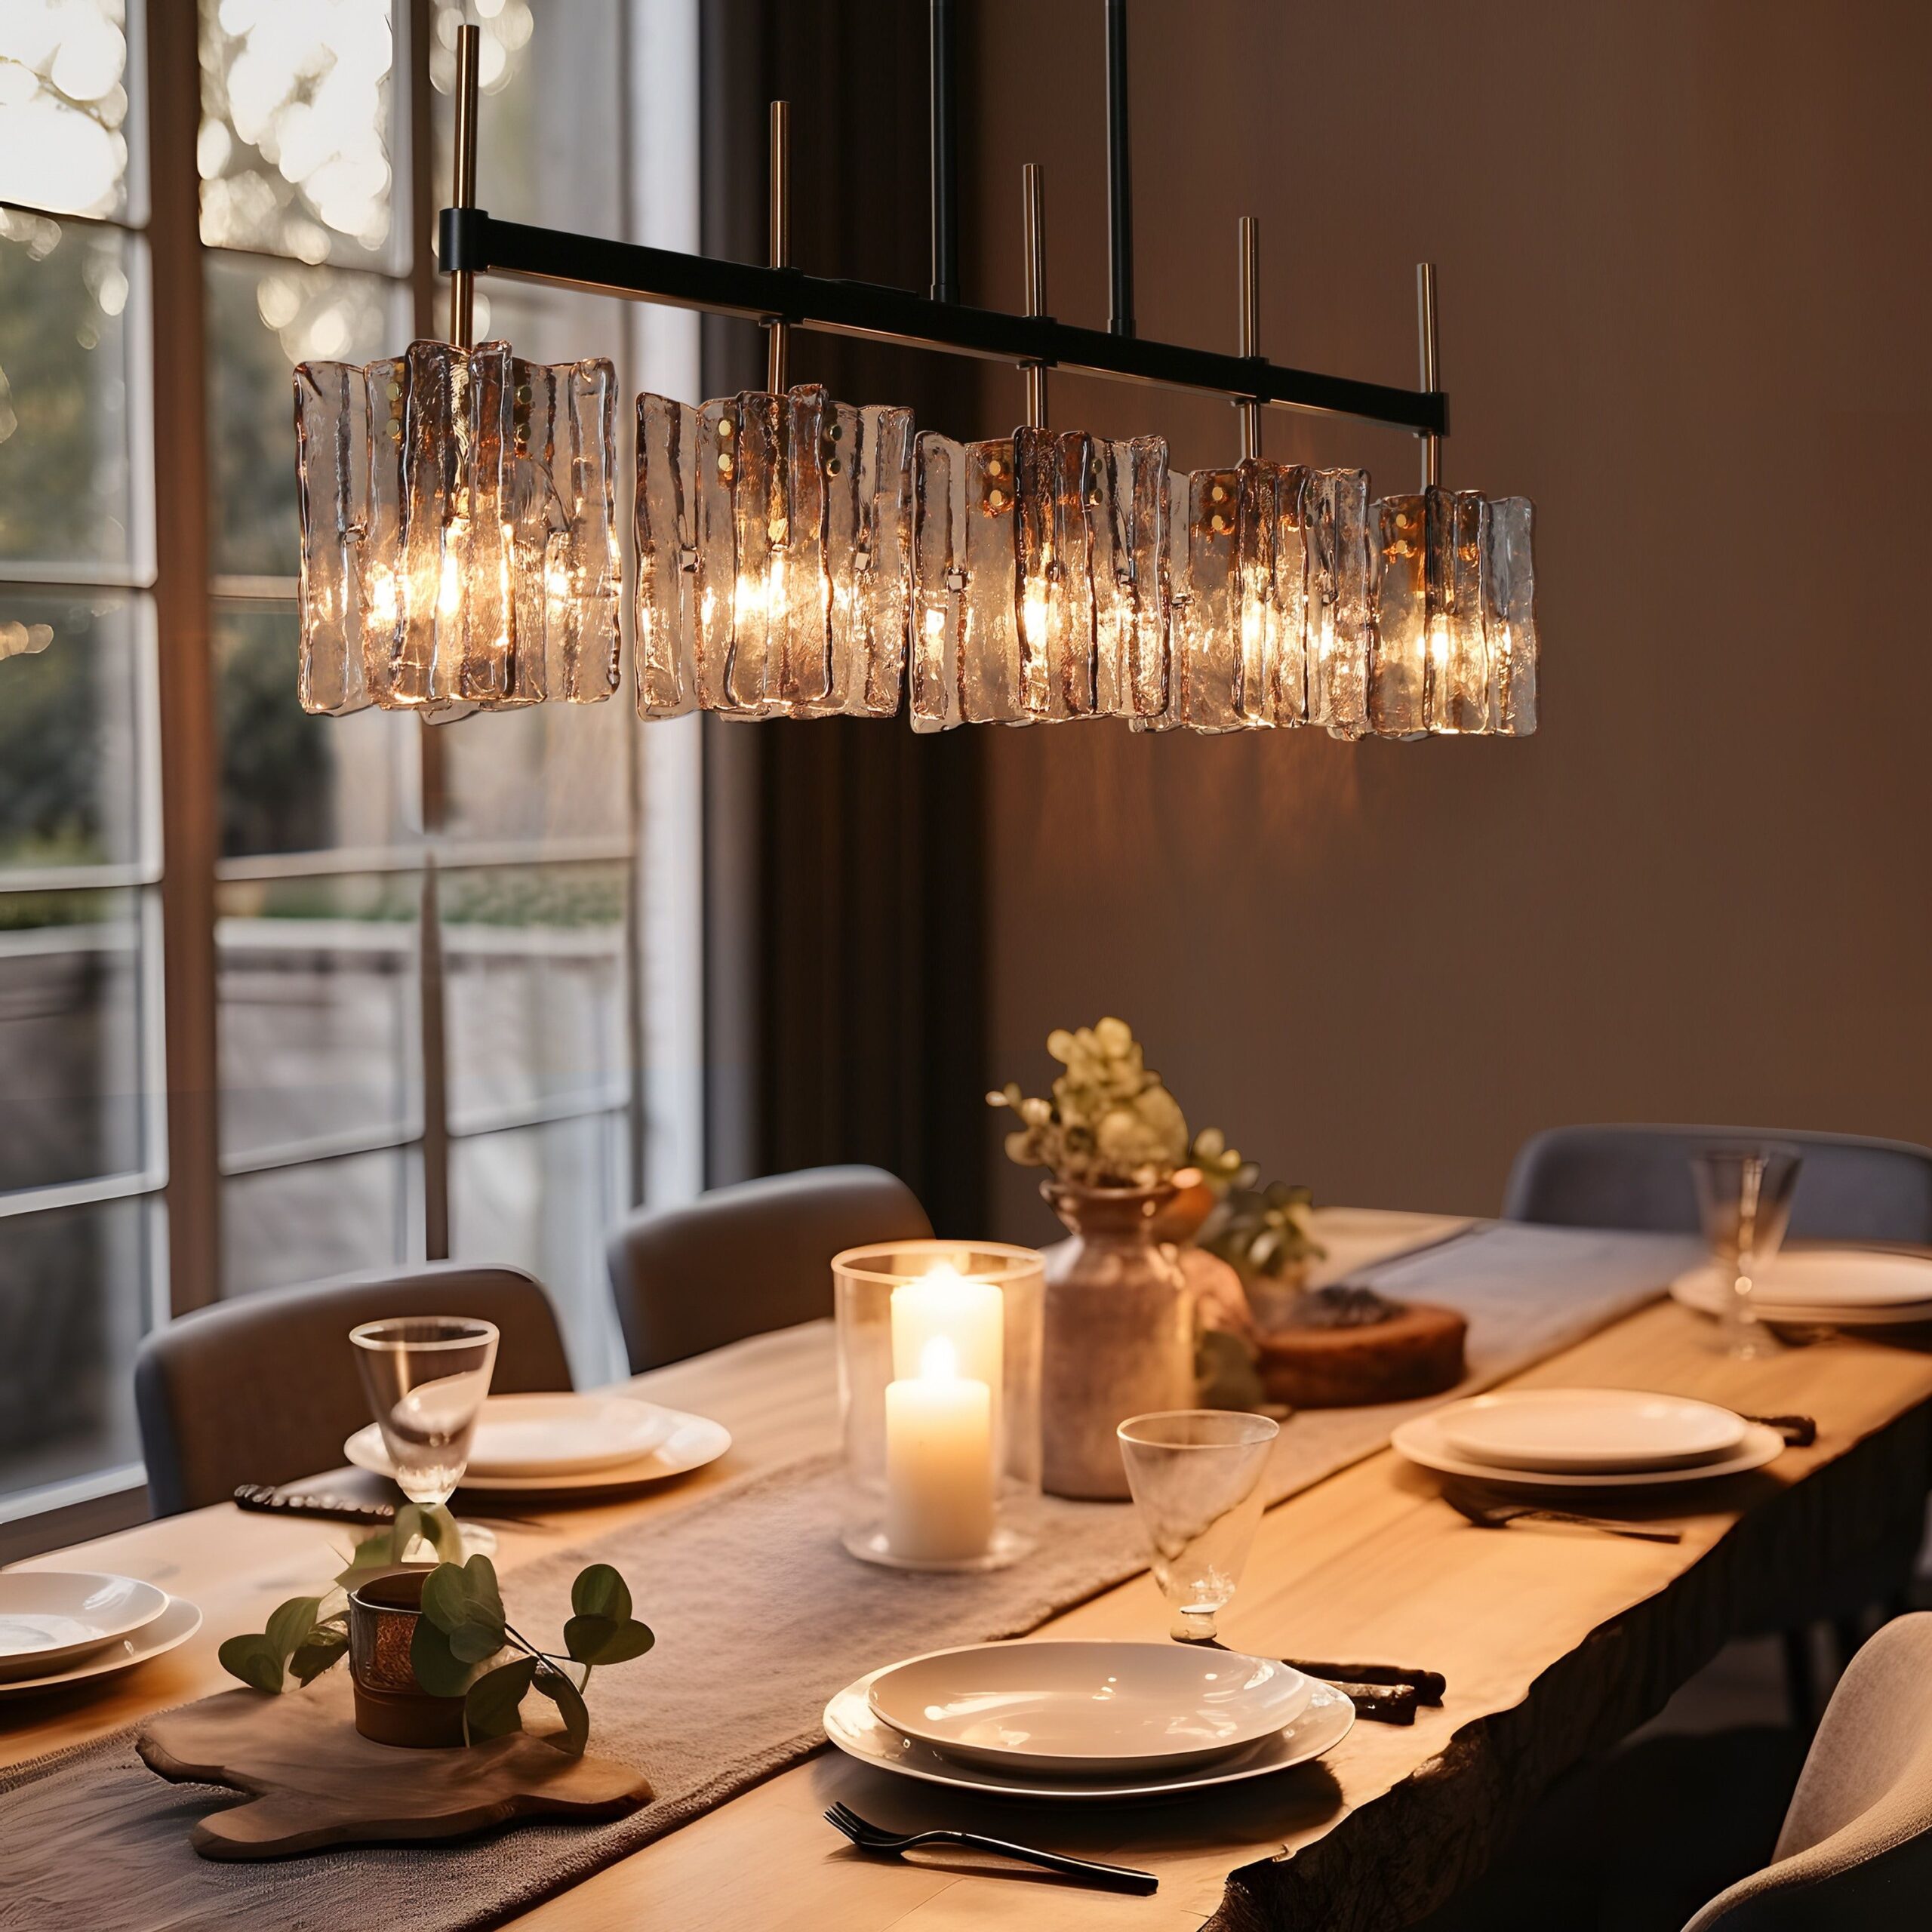 Chandeliers For The Dining Room : Elegant and Stylish Chandeliers for Your Dining Room – Upgrade Your Space Today